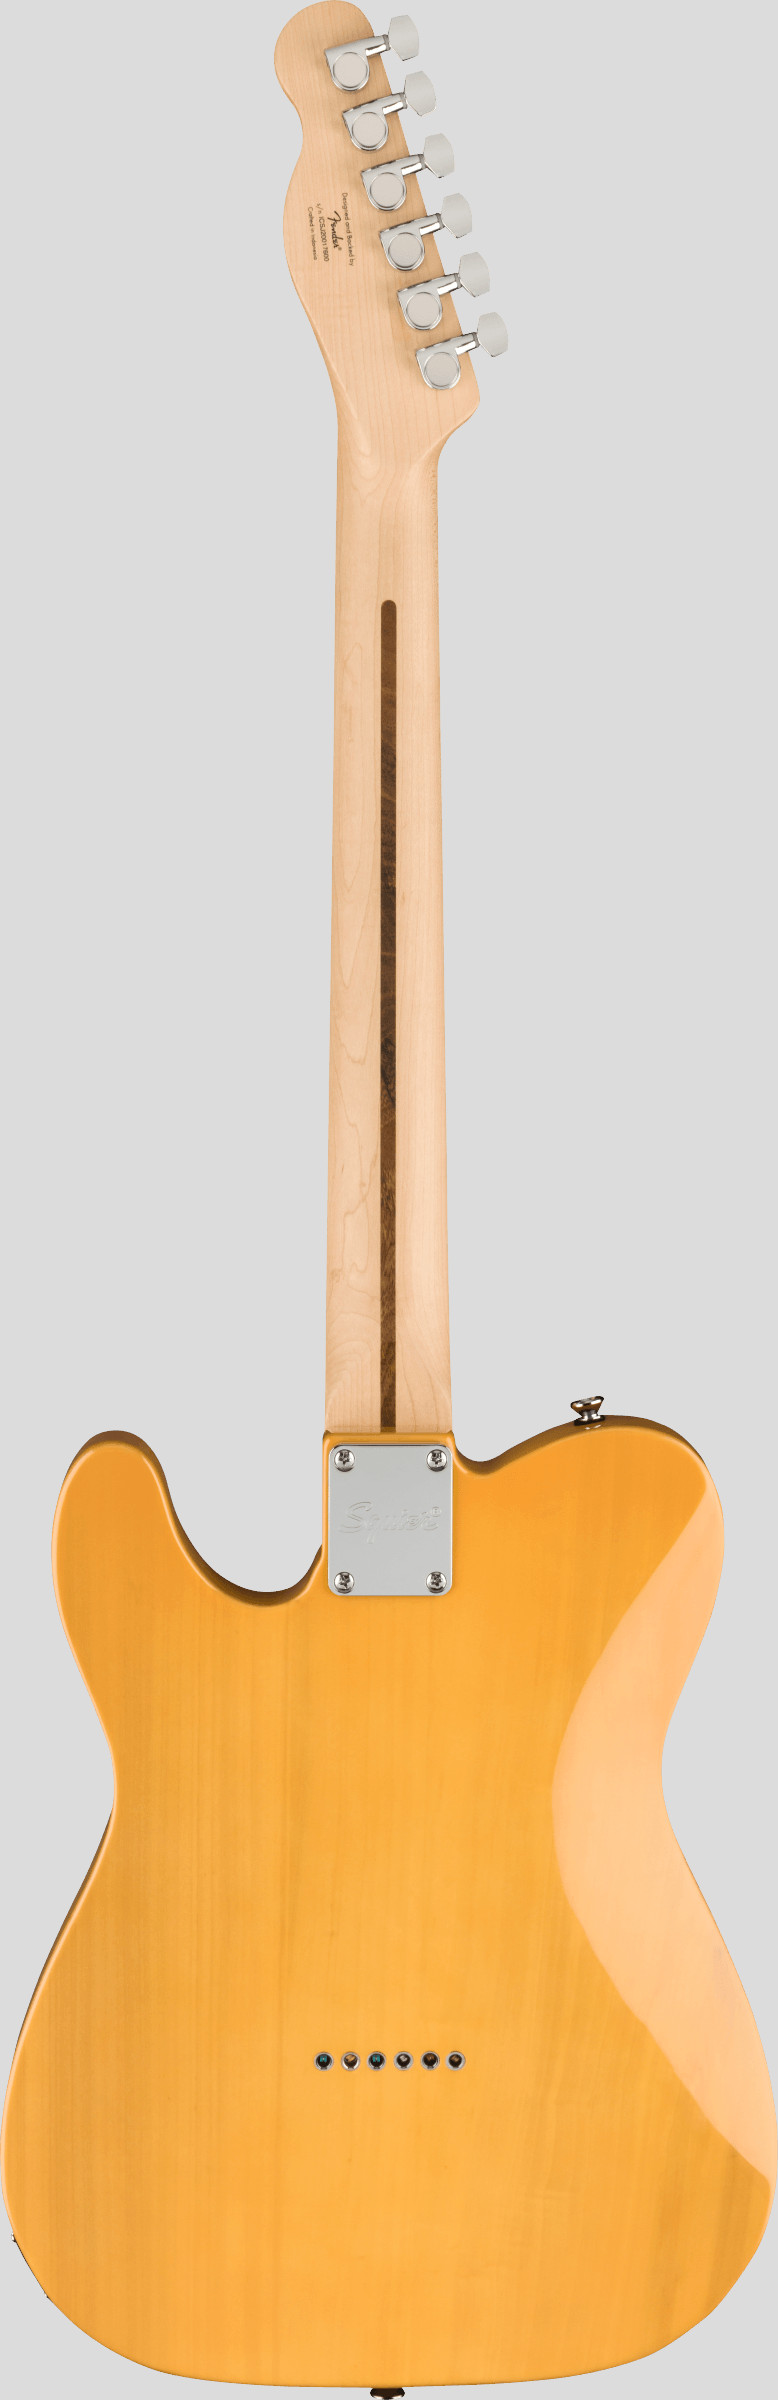 Squier by Fender Affinity Telecaster Butterscotch Blonde 2